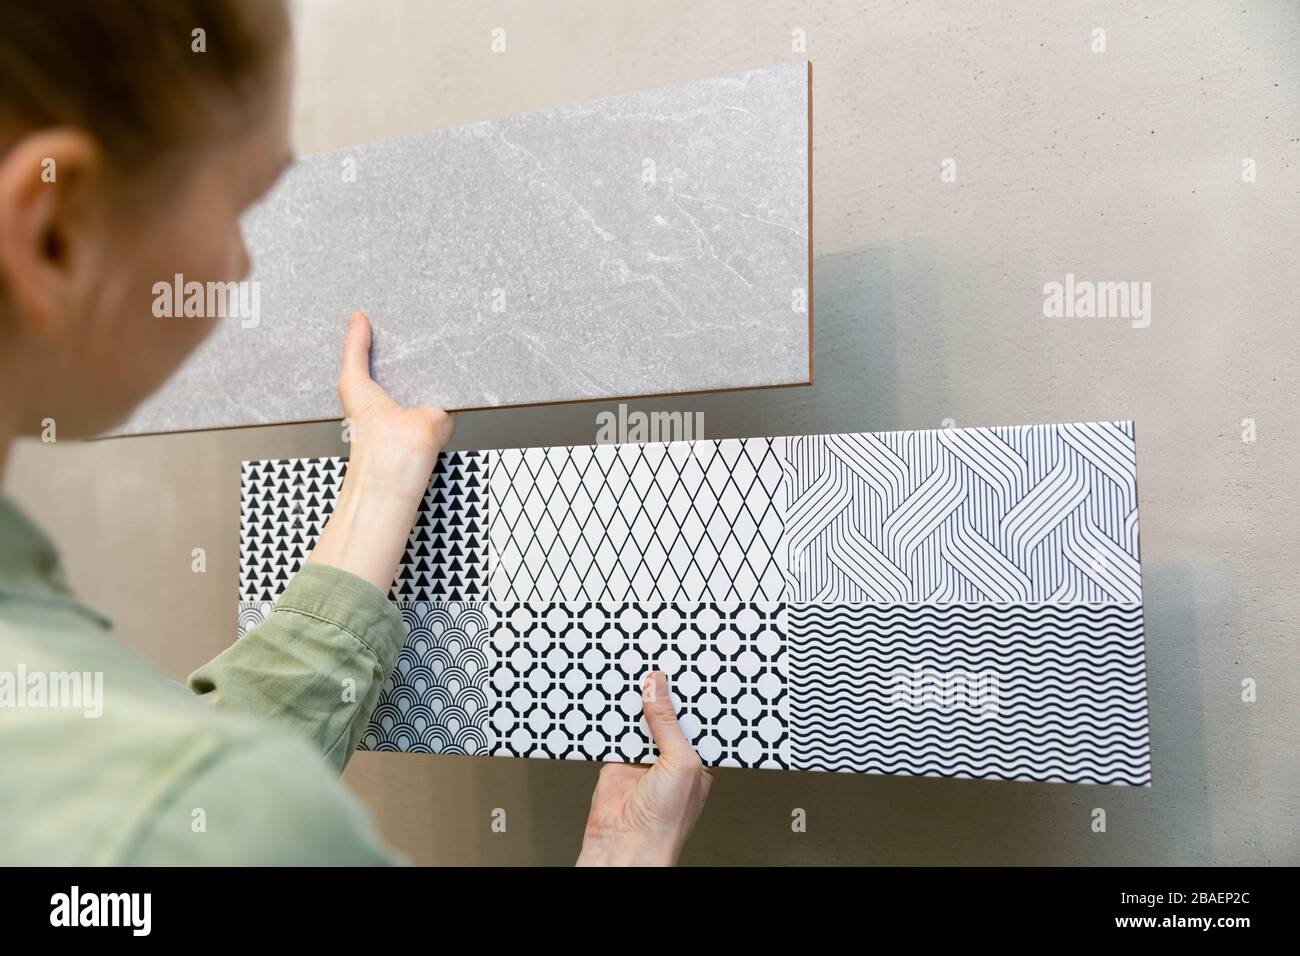 woman choosing wall tiles for her new bathroom interior design Stock Photo